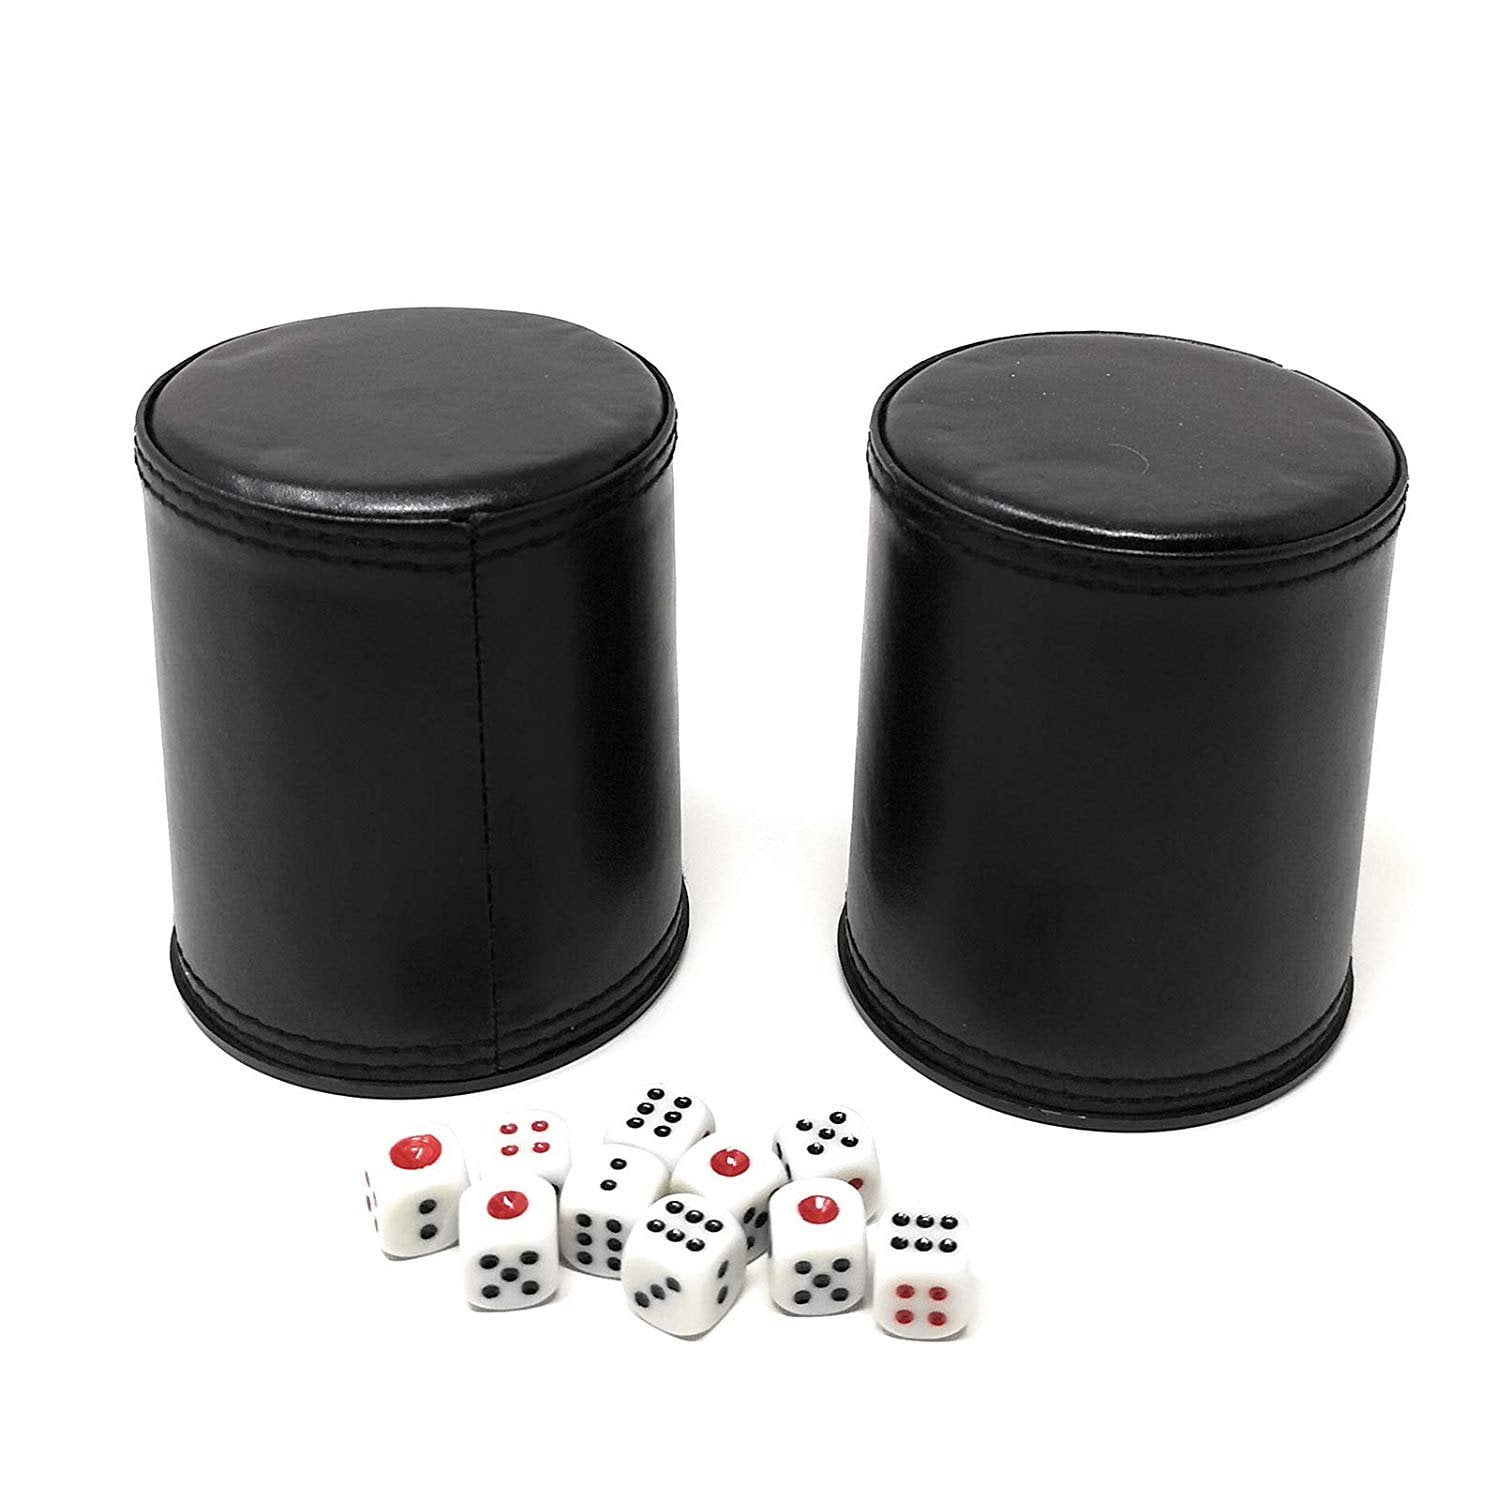 DICE CUP 100 % LEATHER POKER BAR GAMES CASINO SHAKER  and 5 Dice 16mm 